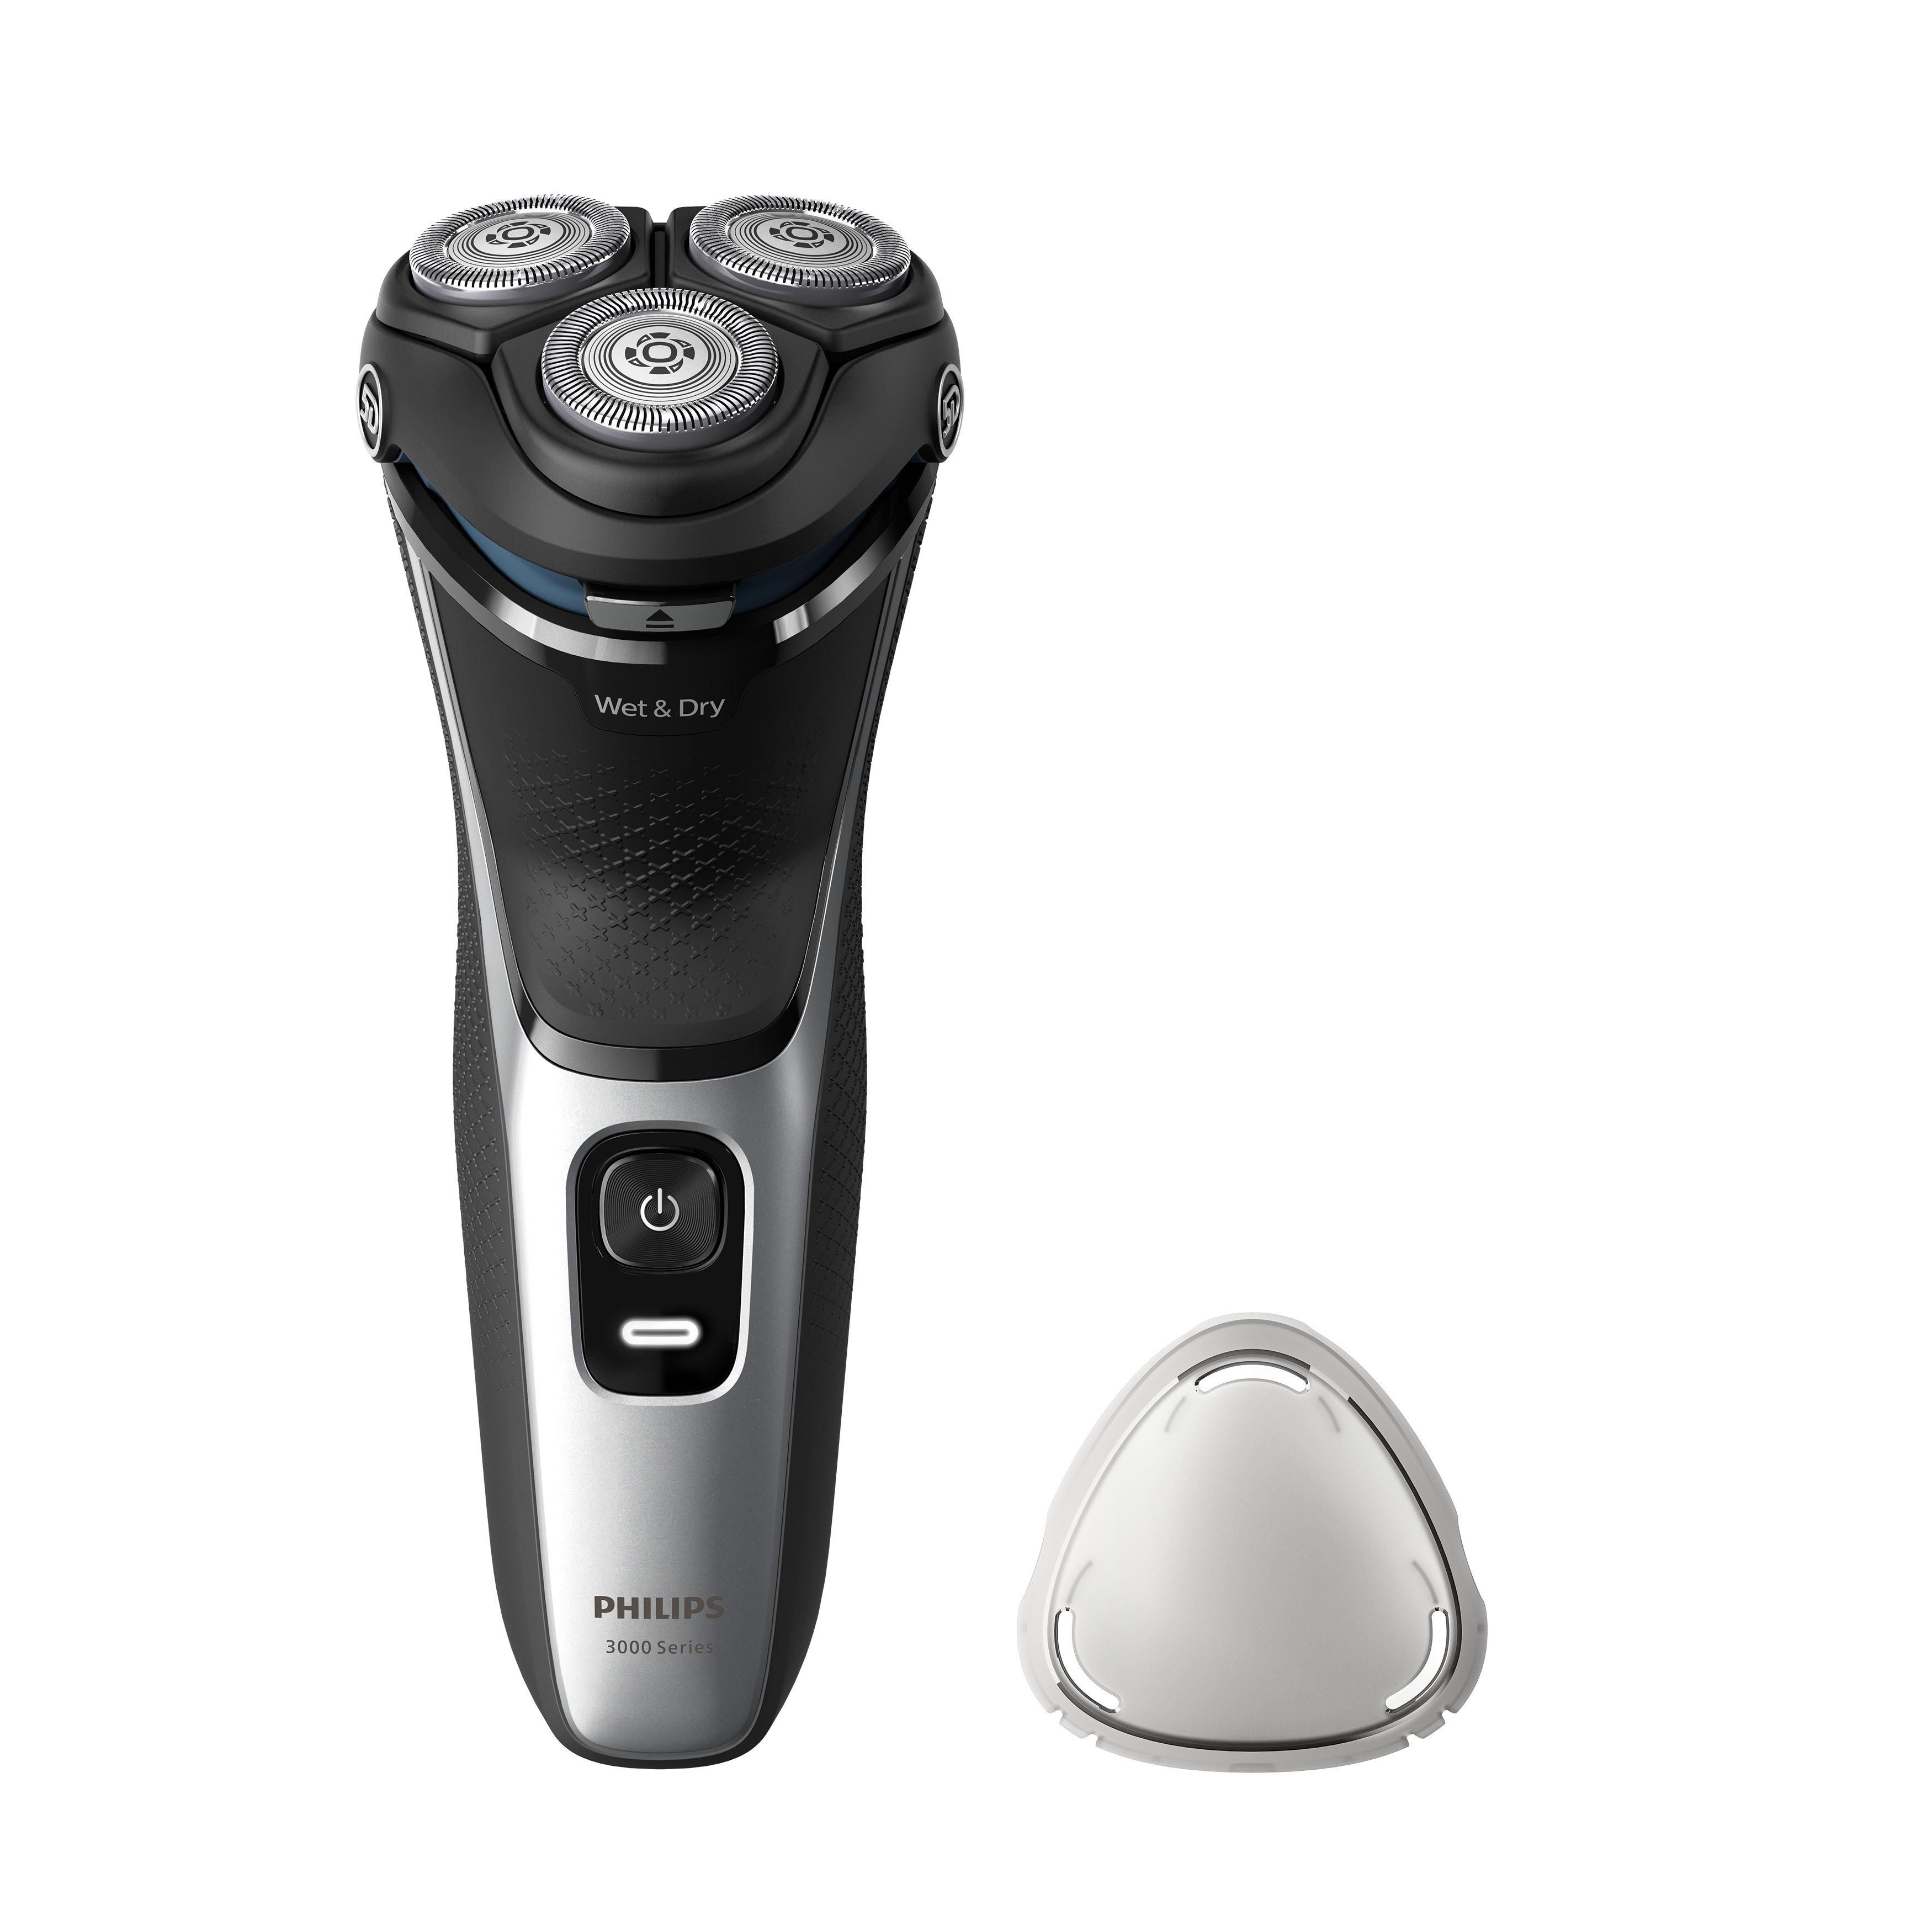 Philips Shaver 3000 Series